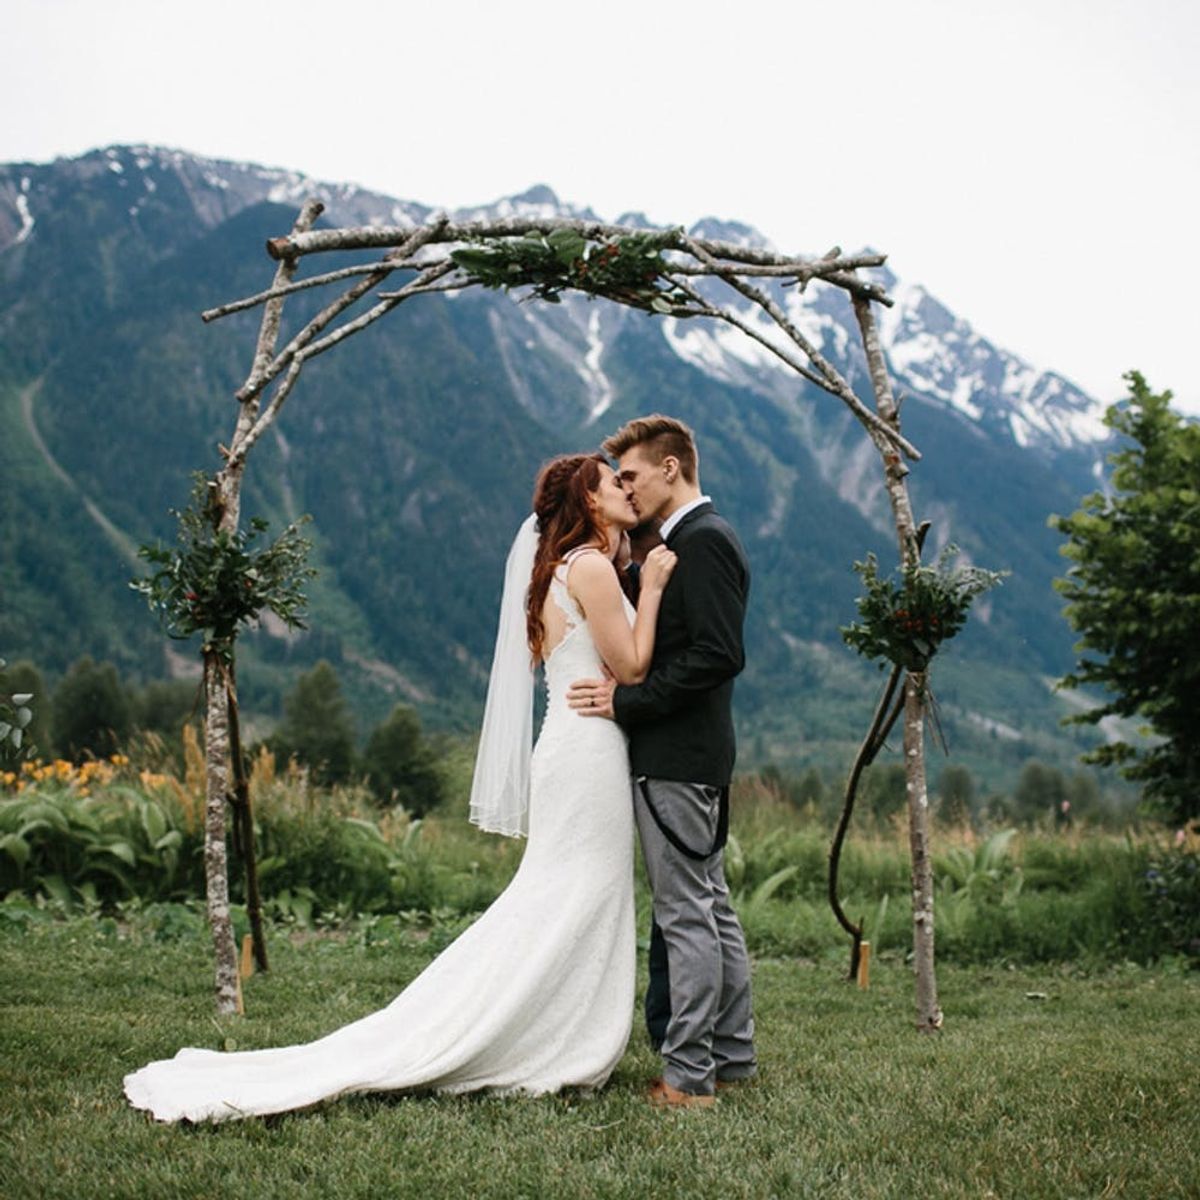 This Canadian Farm Wedding Is What DIY Dreams Are Made Of